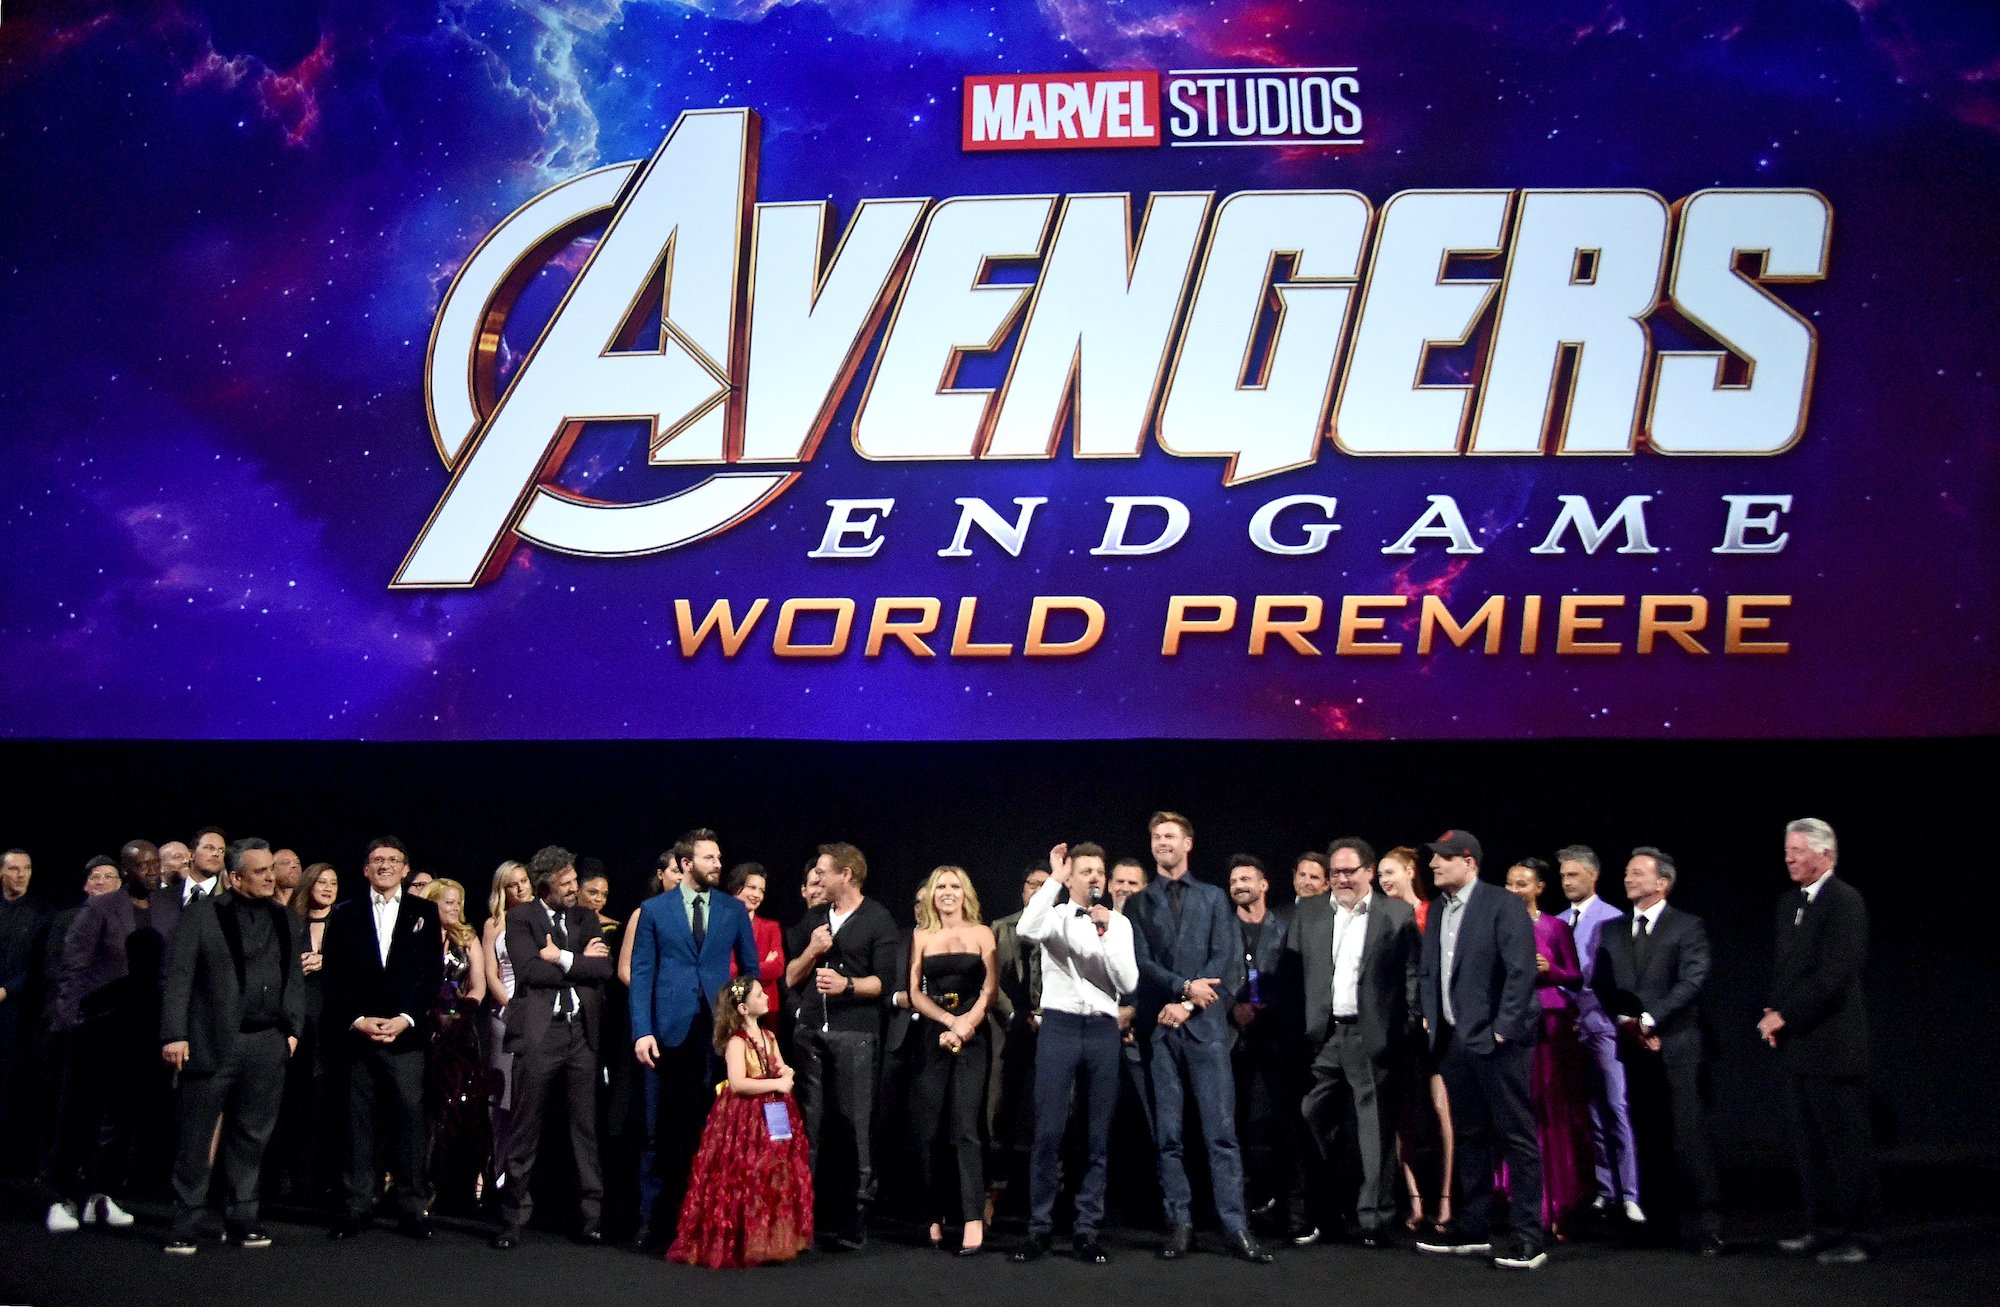 The cast and crew of Avengers: Endgame stands on the red carpet for a group photo.